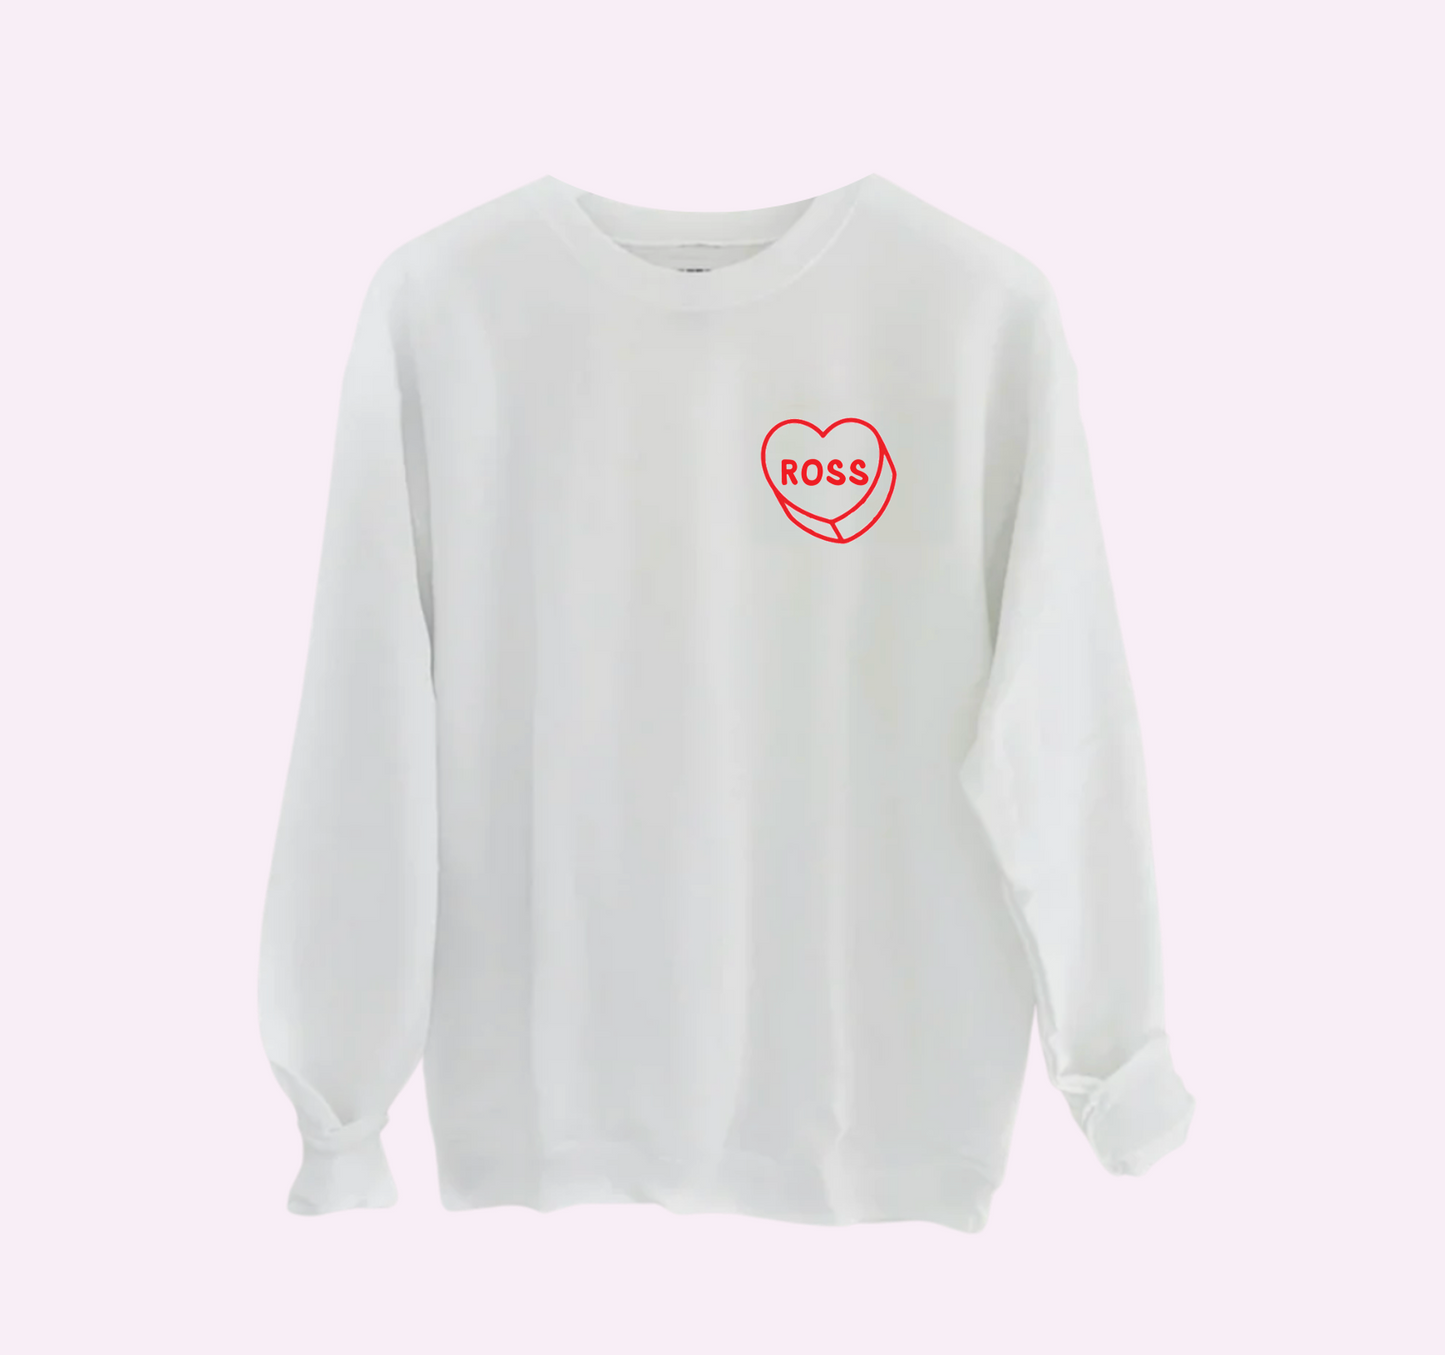 LUV LETTERS ♡ personalizable white sweatshirt